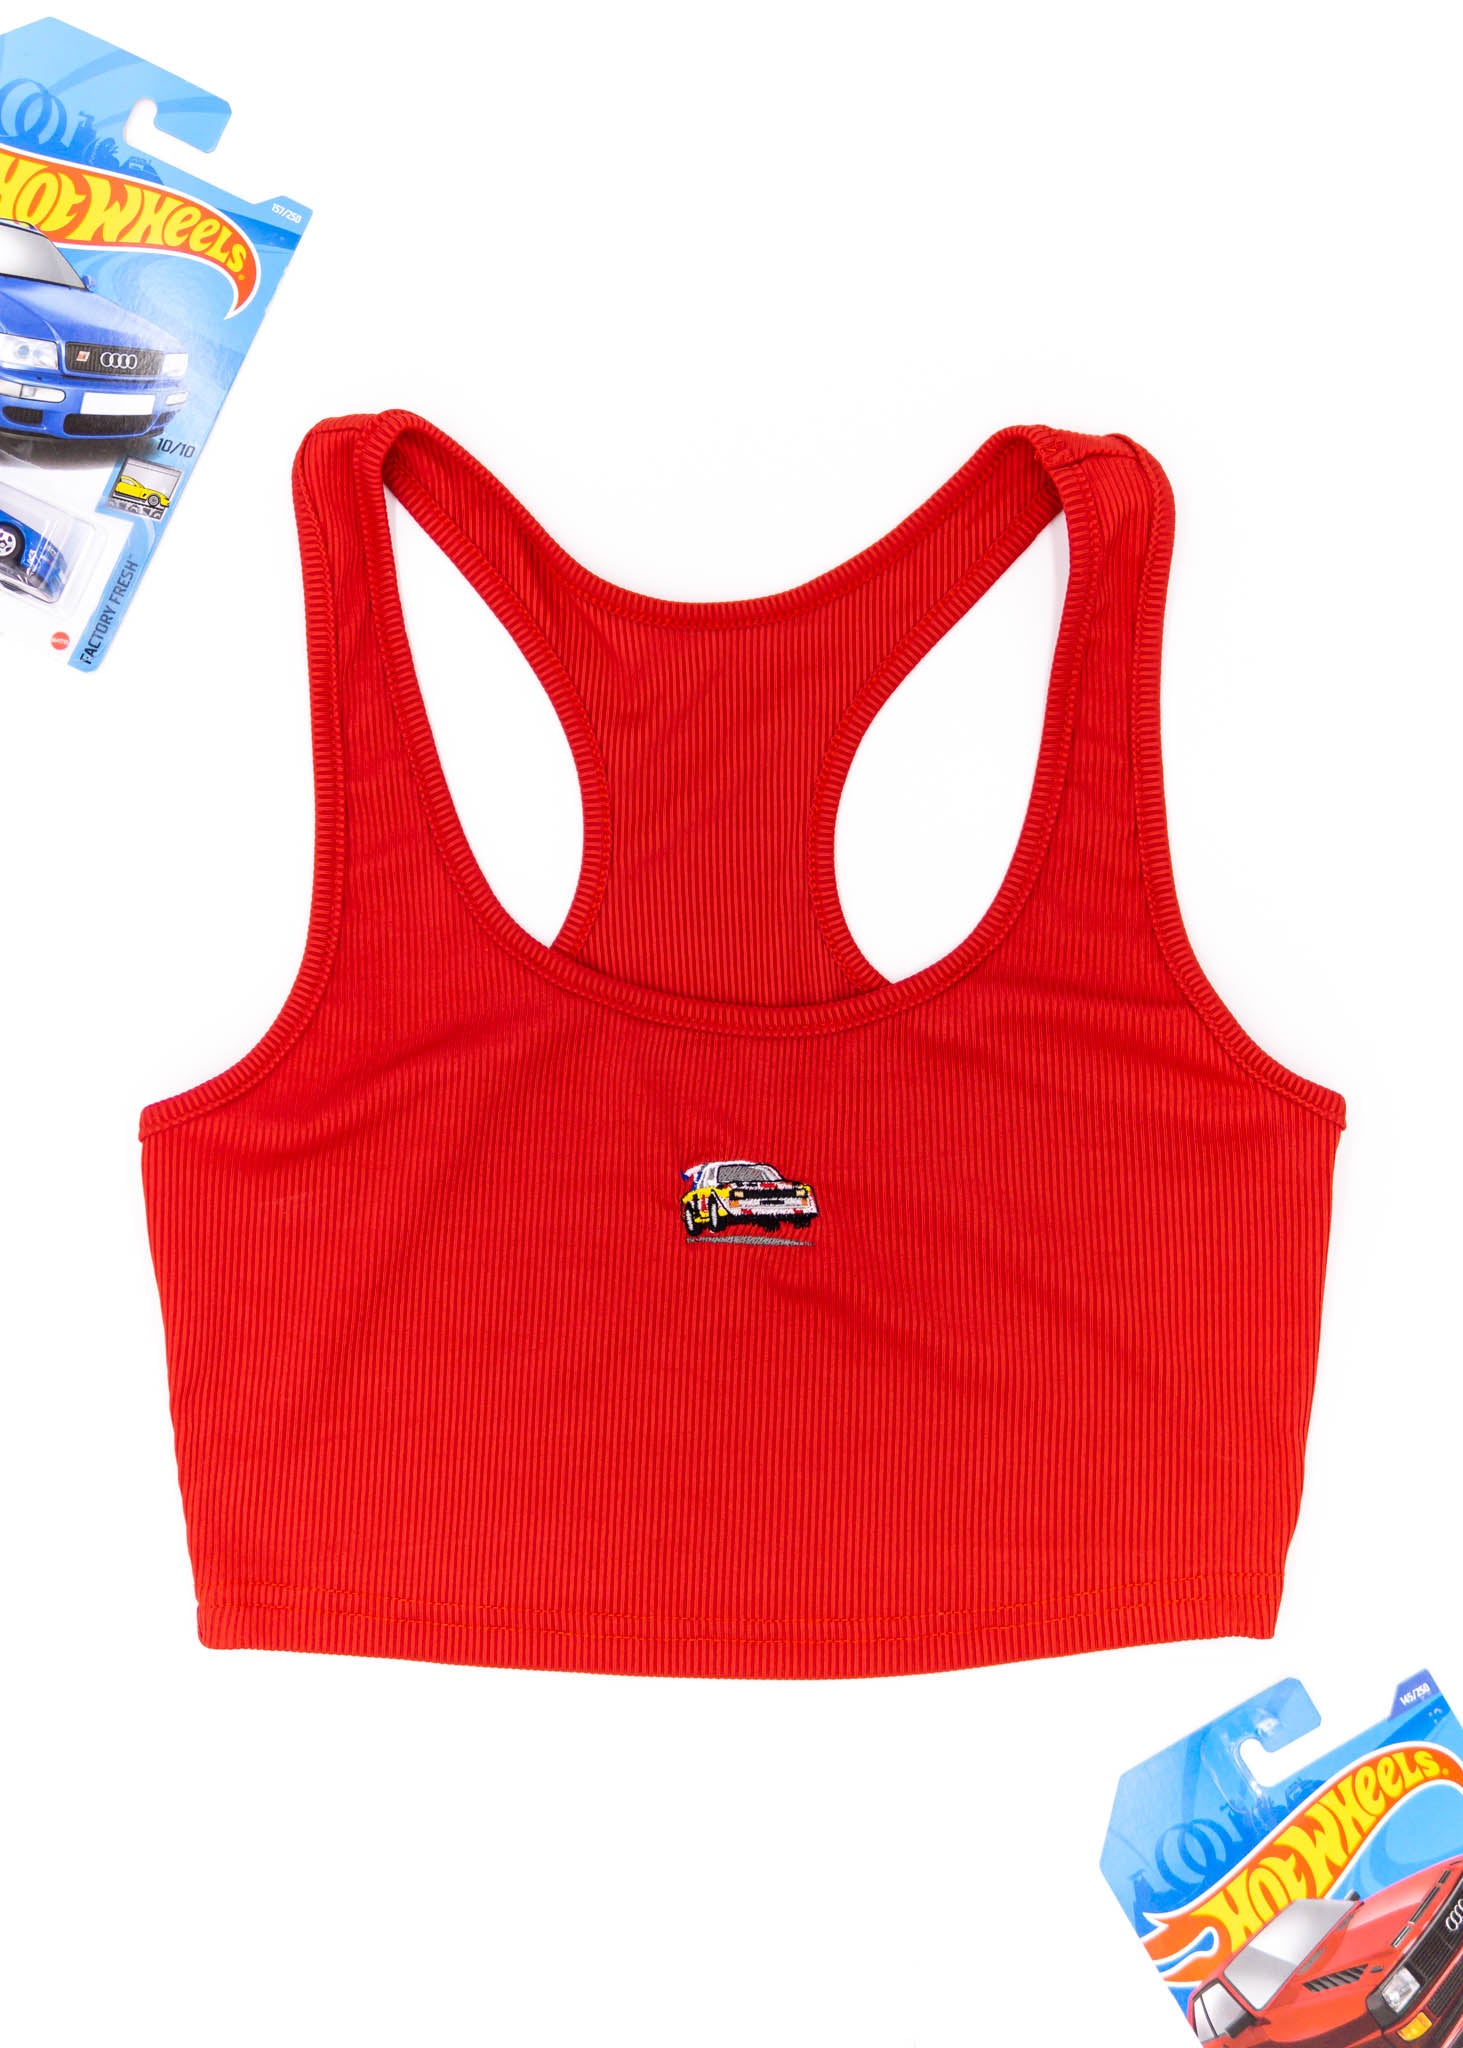 A red Audi crop top for women. Photo is a front view of the top with an embroidered Audi Sport Quattro S1 E2. Fabric composition is polyester, and cotton. The material is stretchy, ribbed, and non-transparent. The style of this shirt is sleeveless, with a scoop neckline.